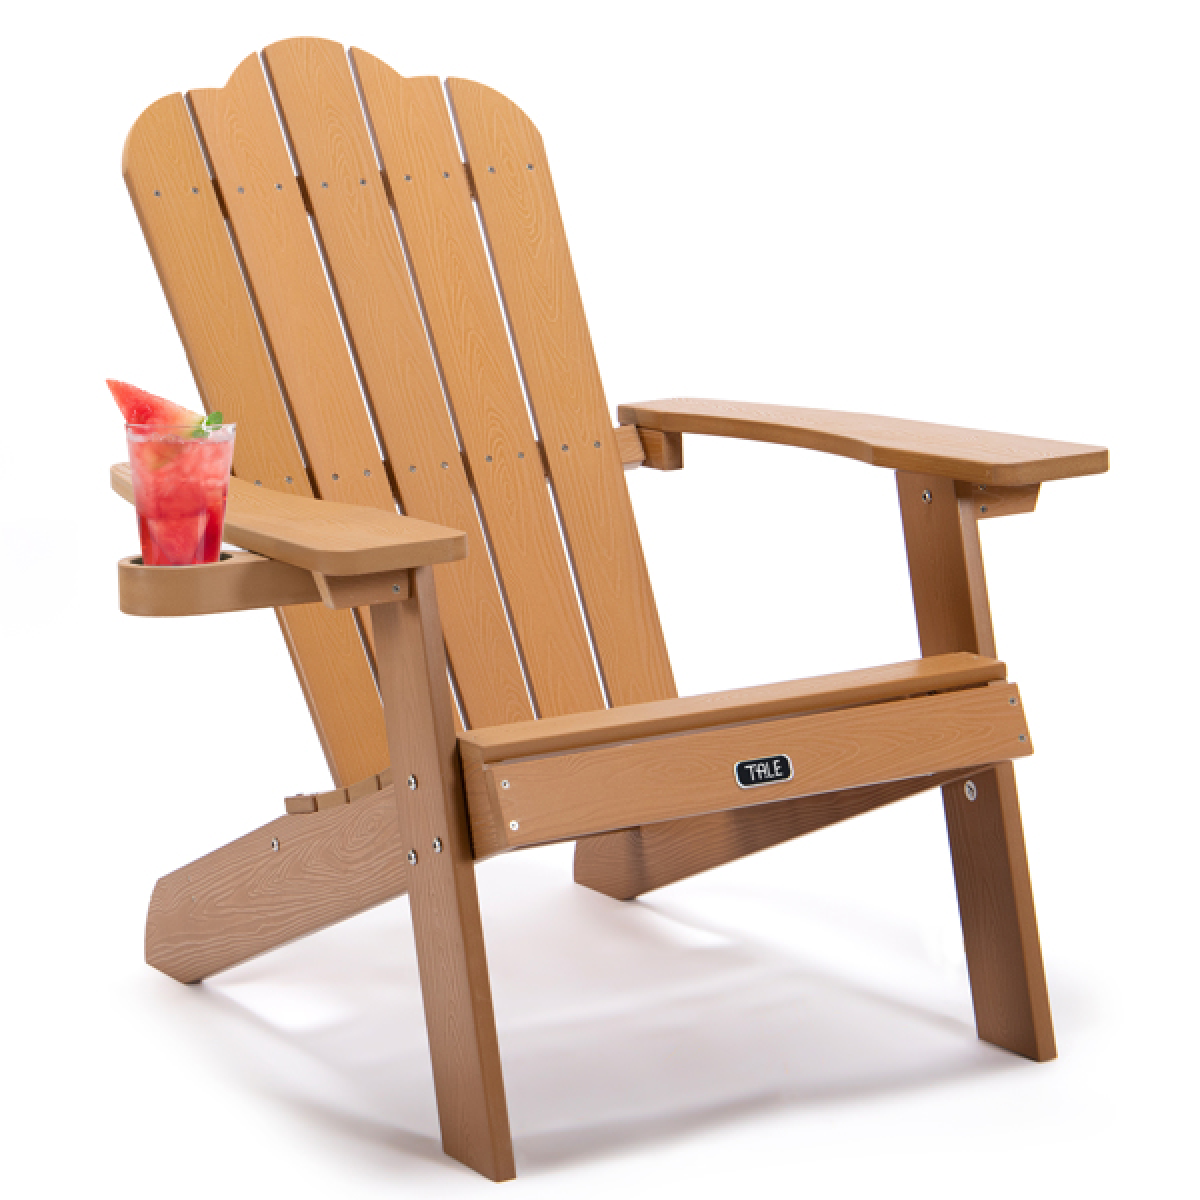 [Quick Delivery] Adirondack Chair, Outdoor Weather Resistant 380 lbs Capacity Load Plastic Patio Chairs for Pool Patio Deck Garden, Backyard Polystyrene Adirondack Chair,Brown - image 3 of 14